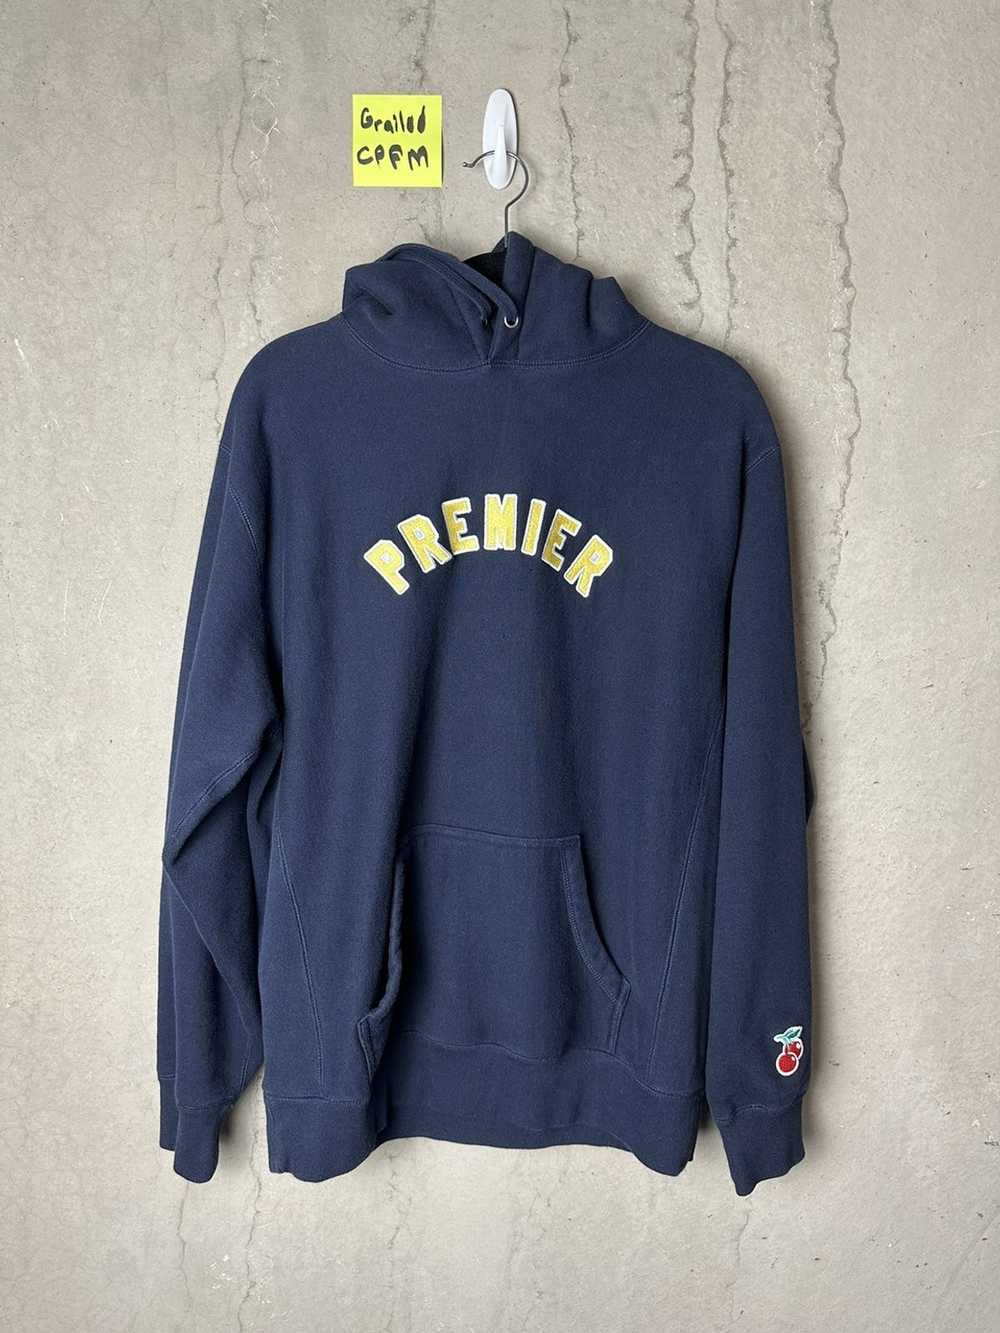 Other Premier Store “Michigan” Logo Hoodie - image 1